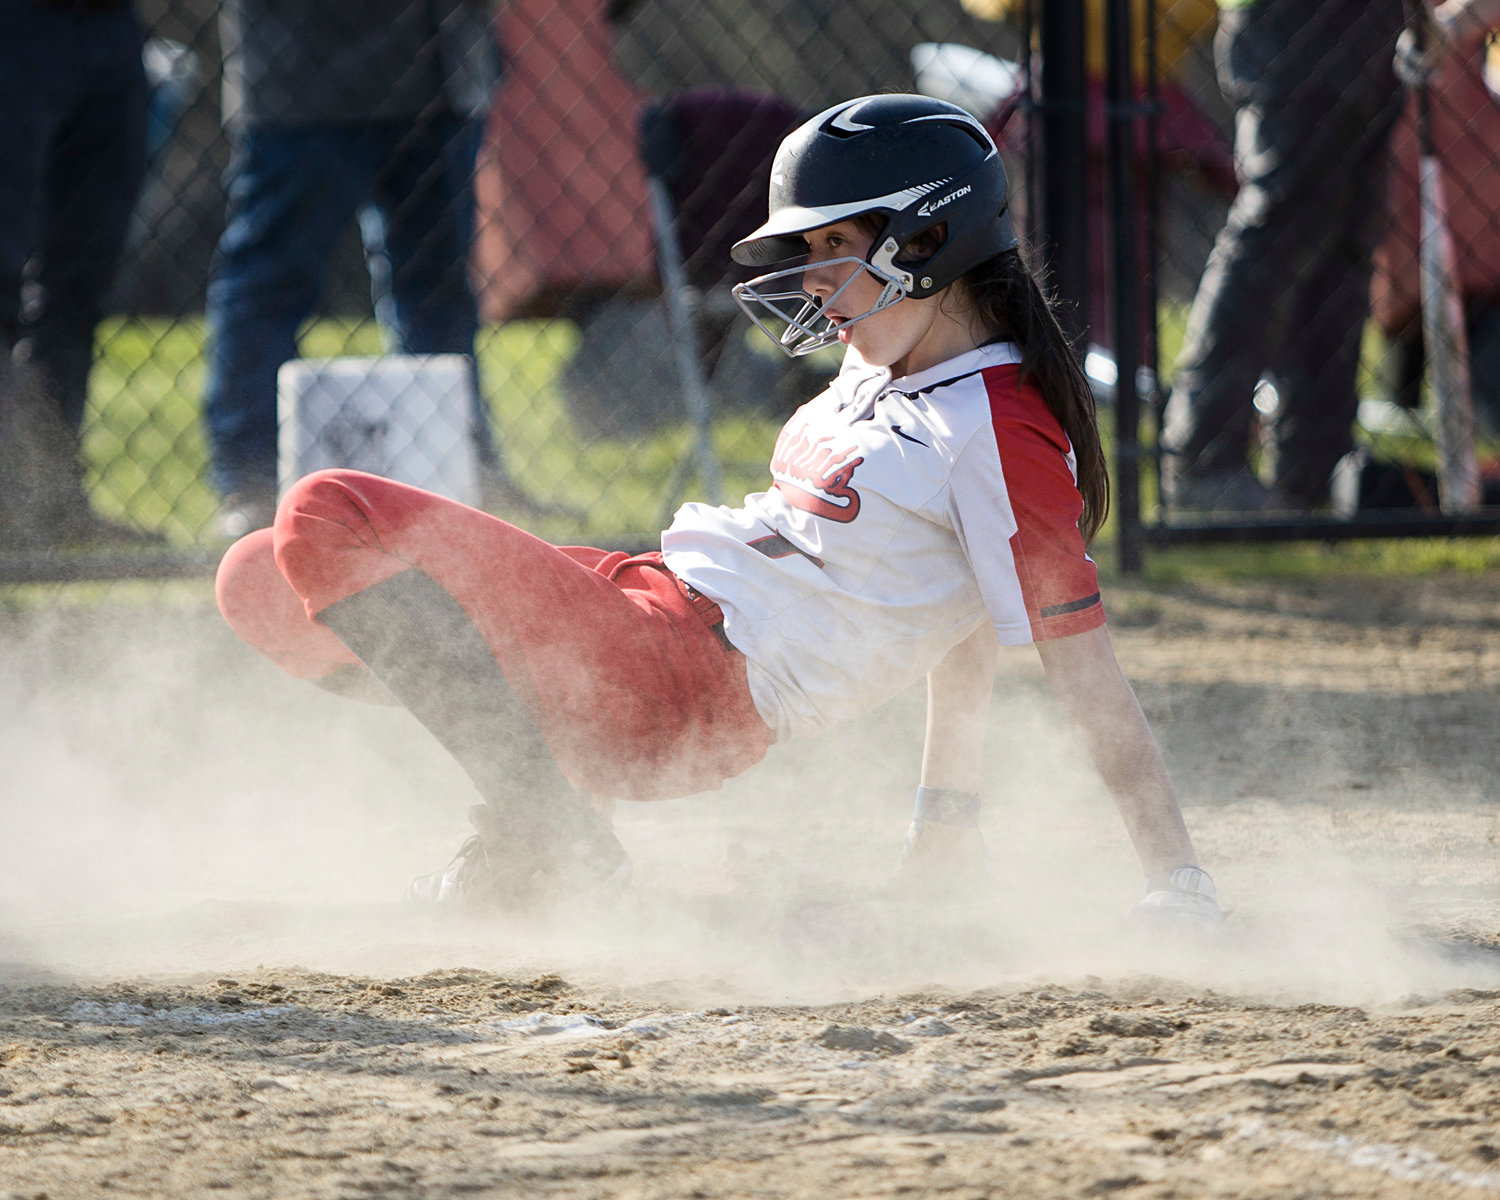 Ella Daly looks for the call as she slides into home plate, scoring the first run for the Patriots.